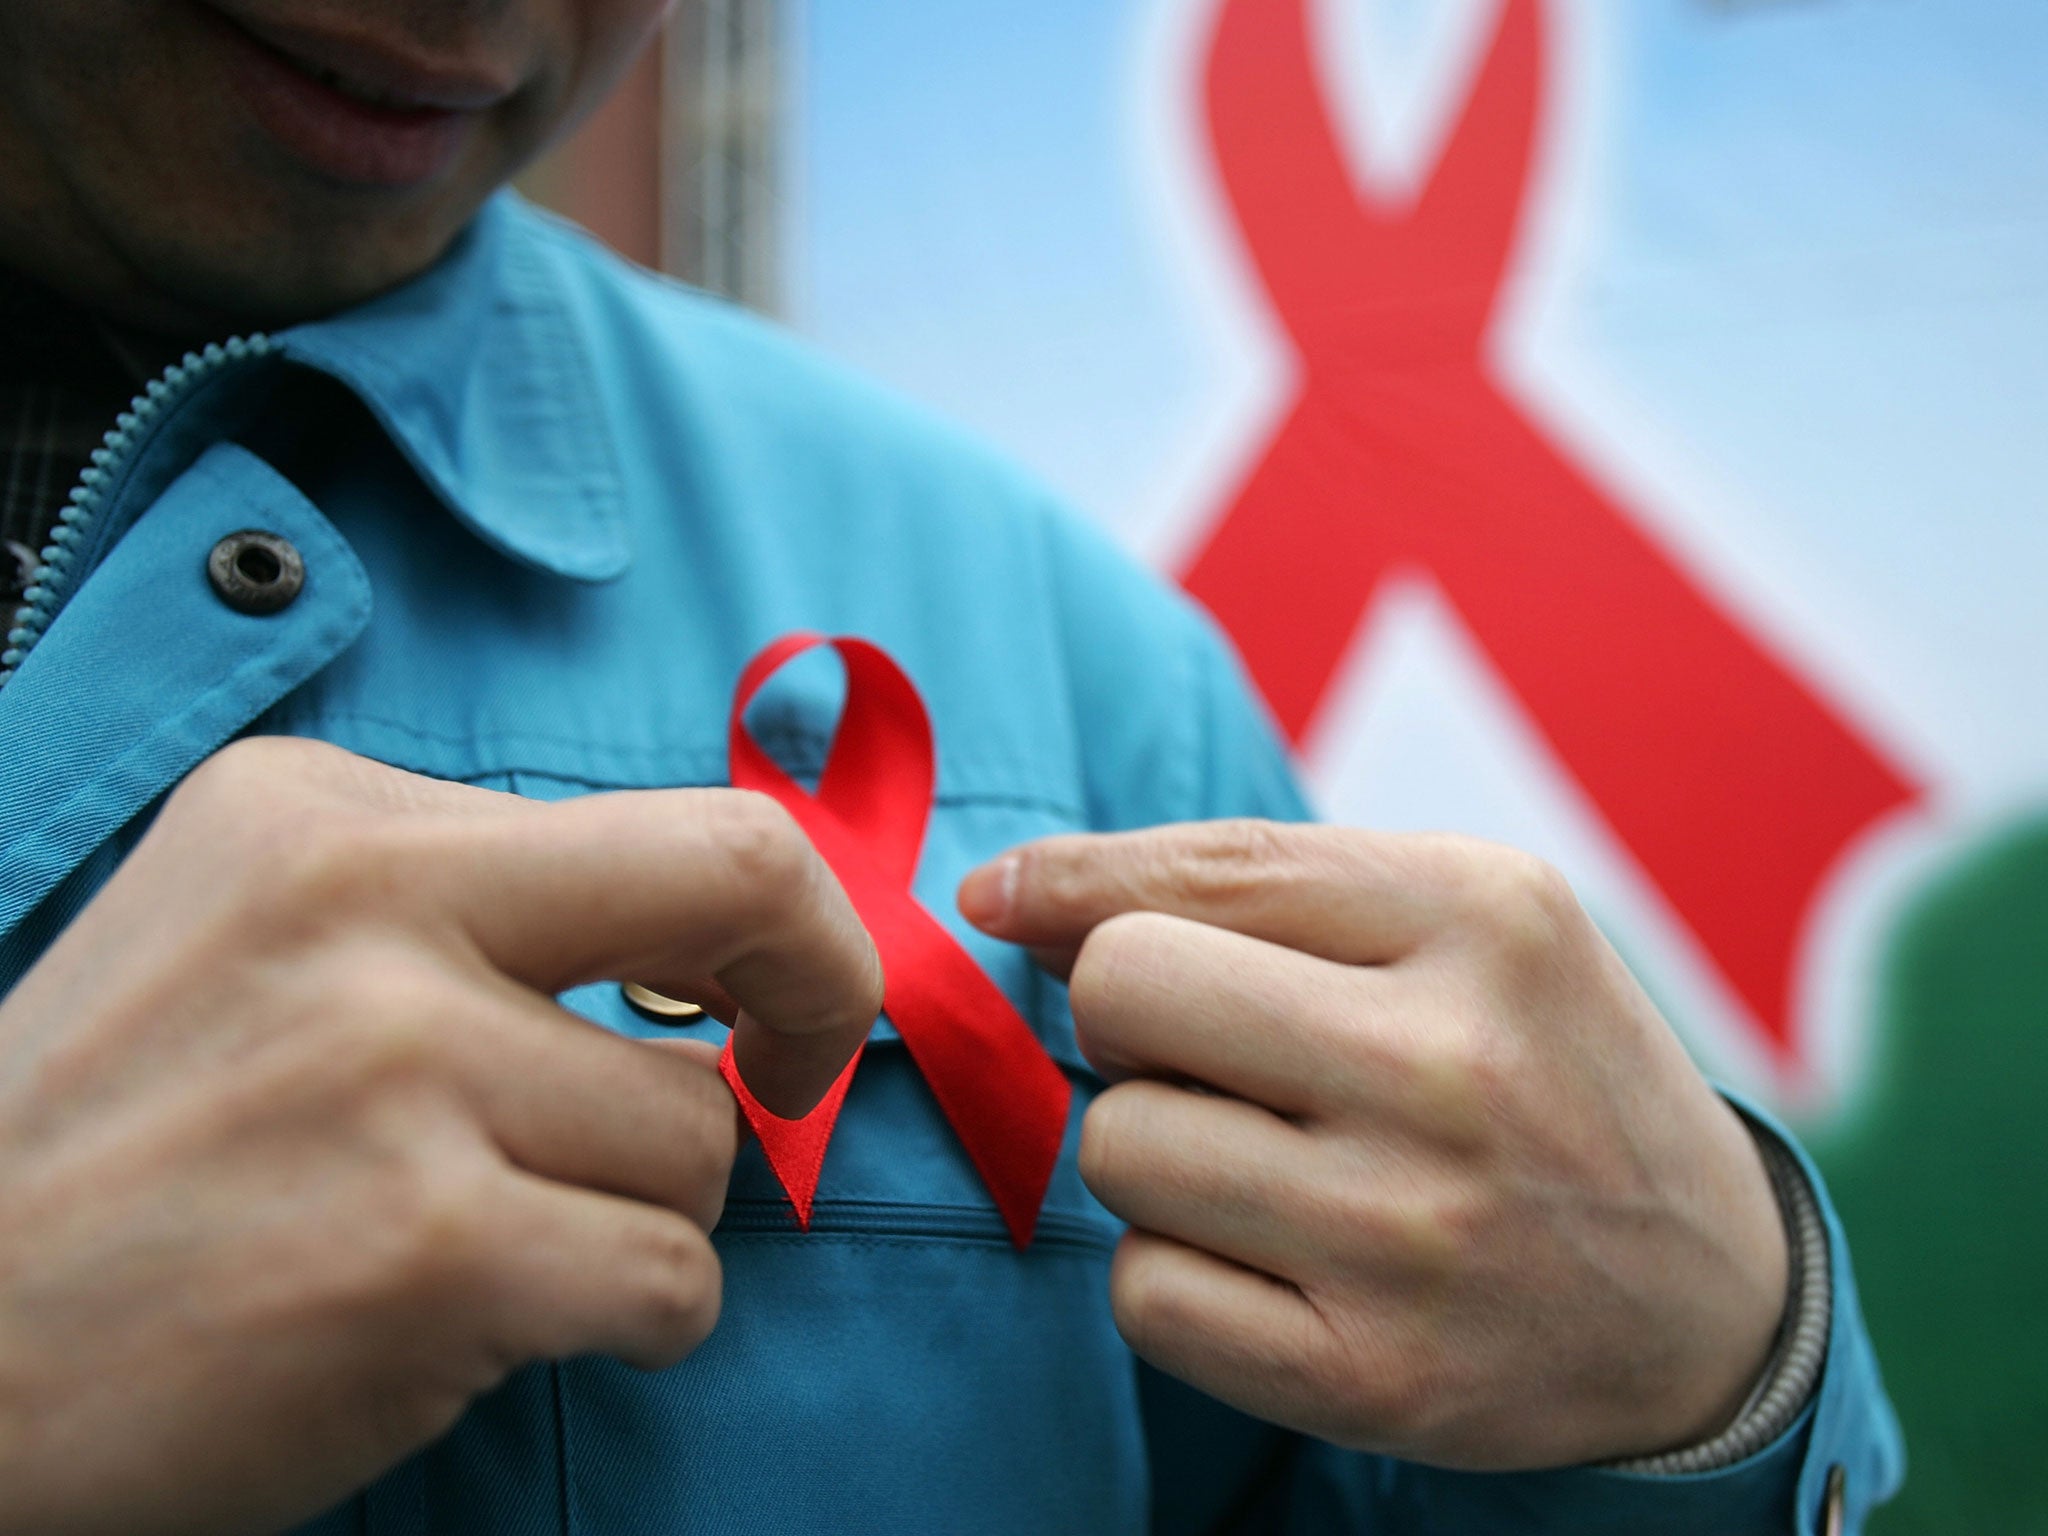 Those living with HIV/AIDs face stigma and myths surrounding the disease